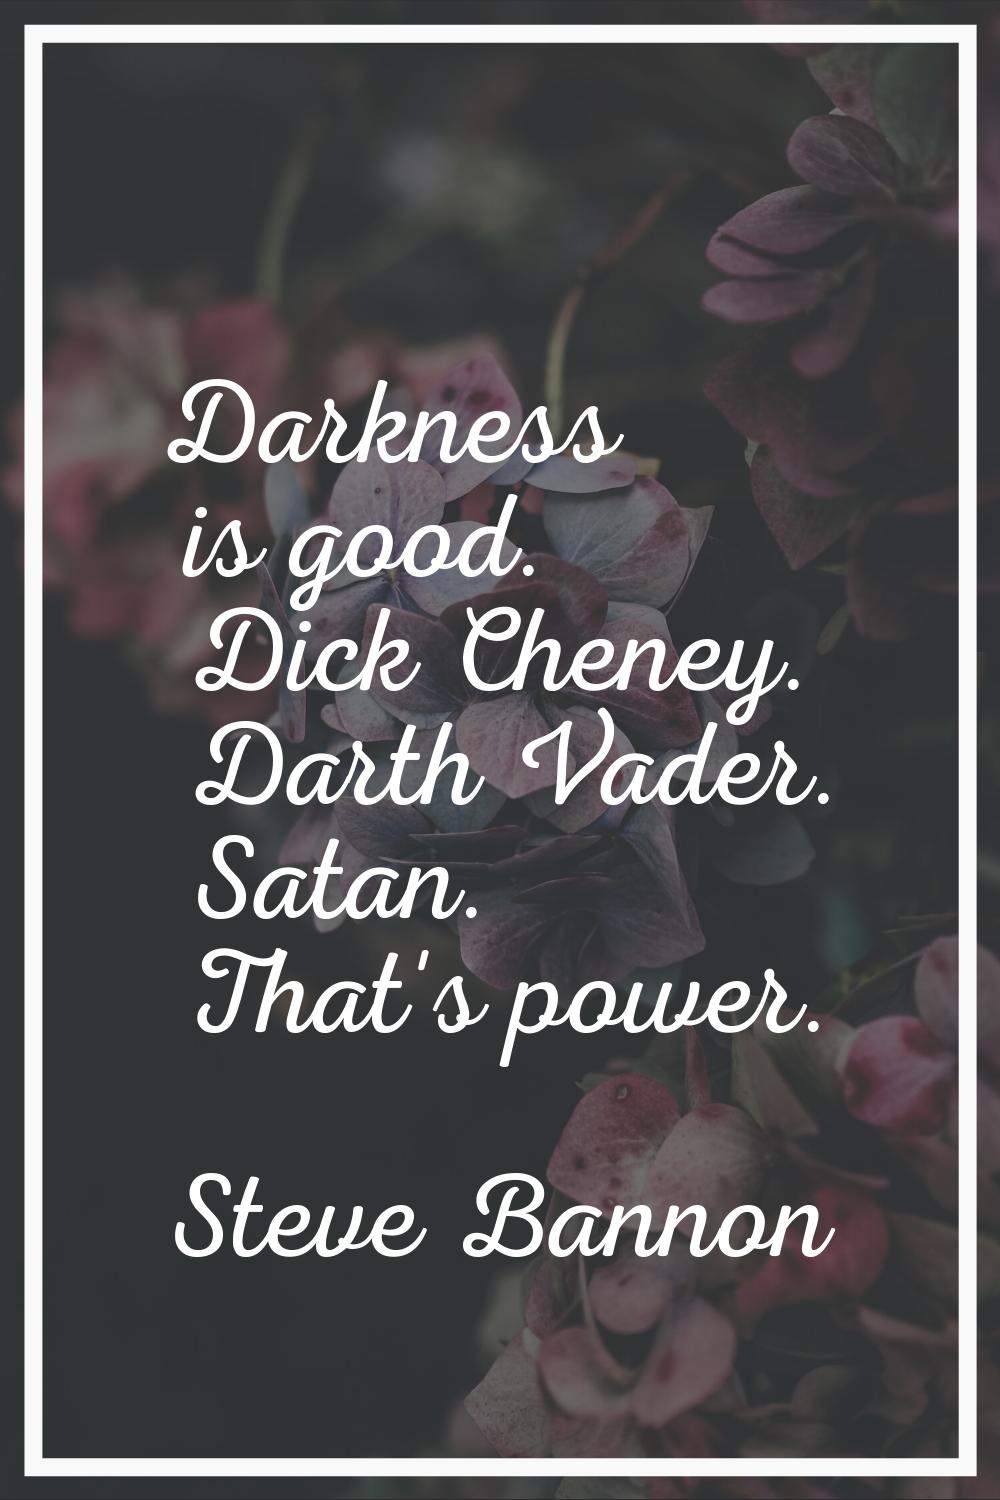 Darkness is good. Dick Cheney. Darth Vader. Satan. That's power.